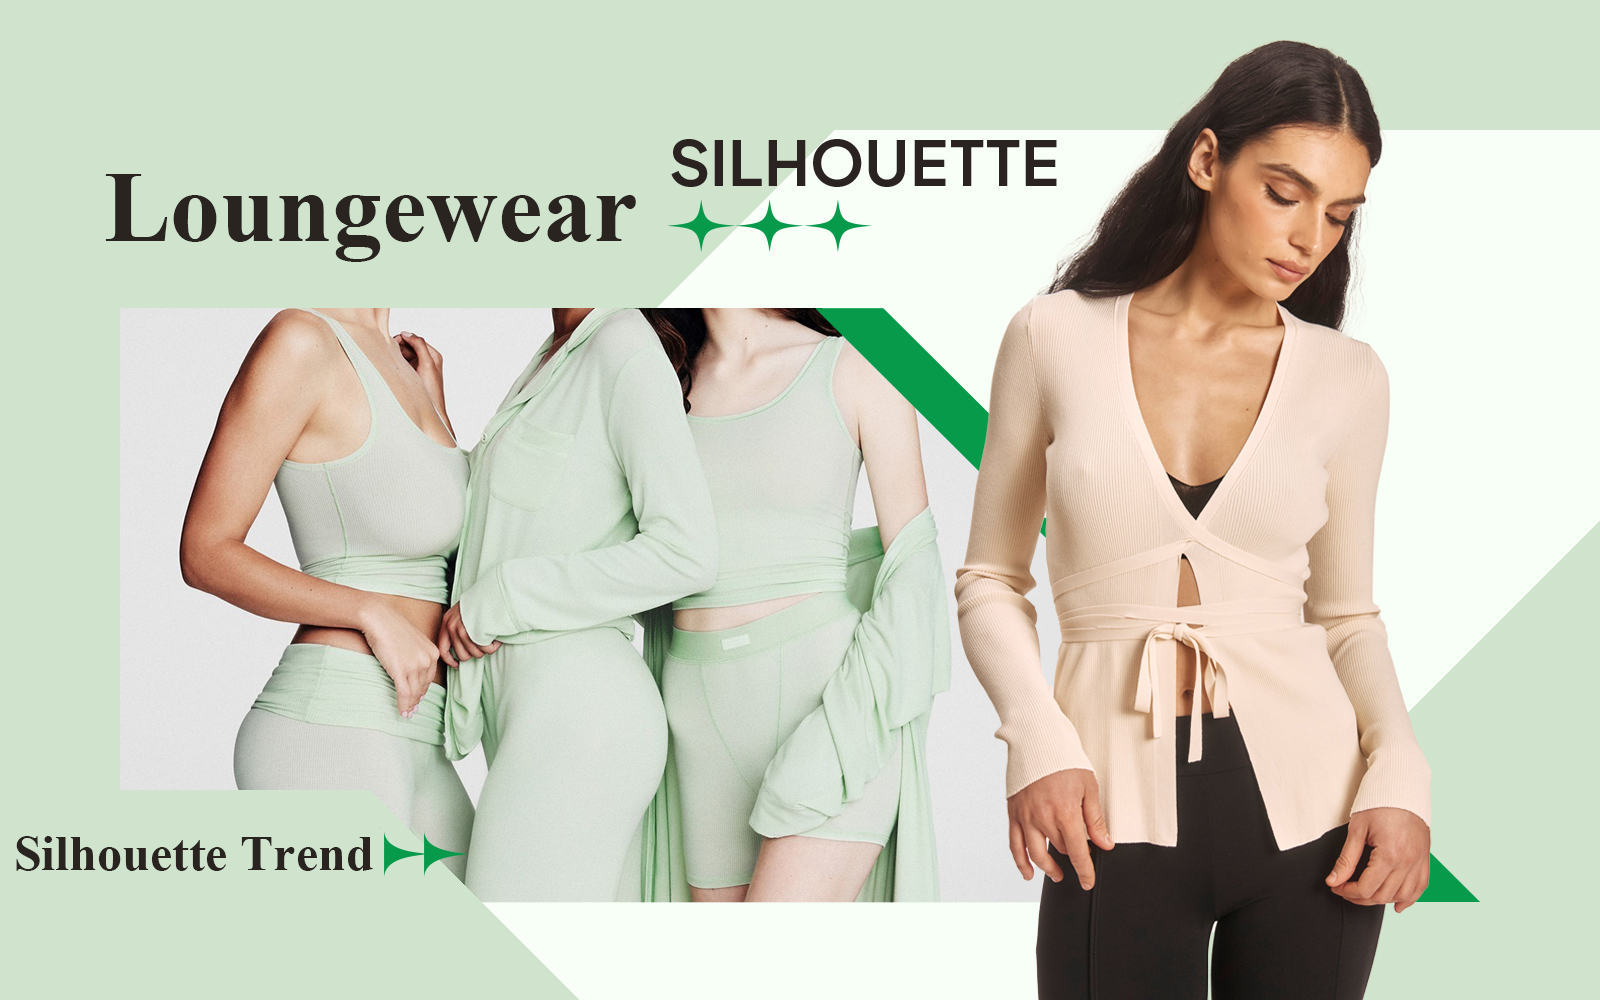 Casual Lifestyle -- The Silhouette Trend for Women's Loungewear